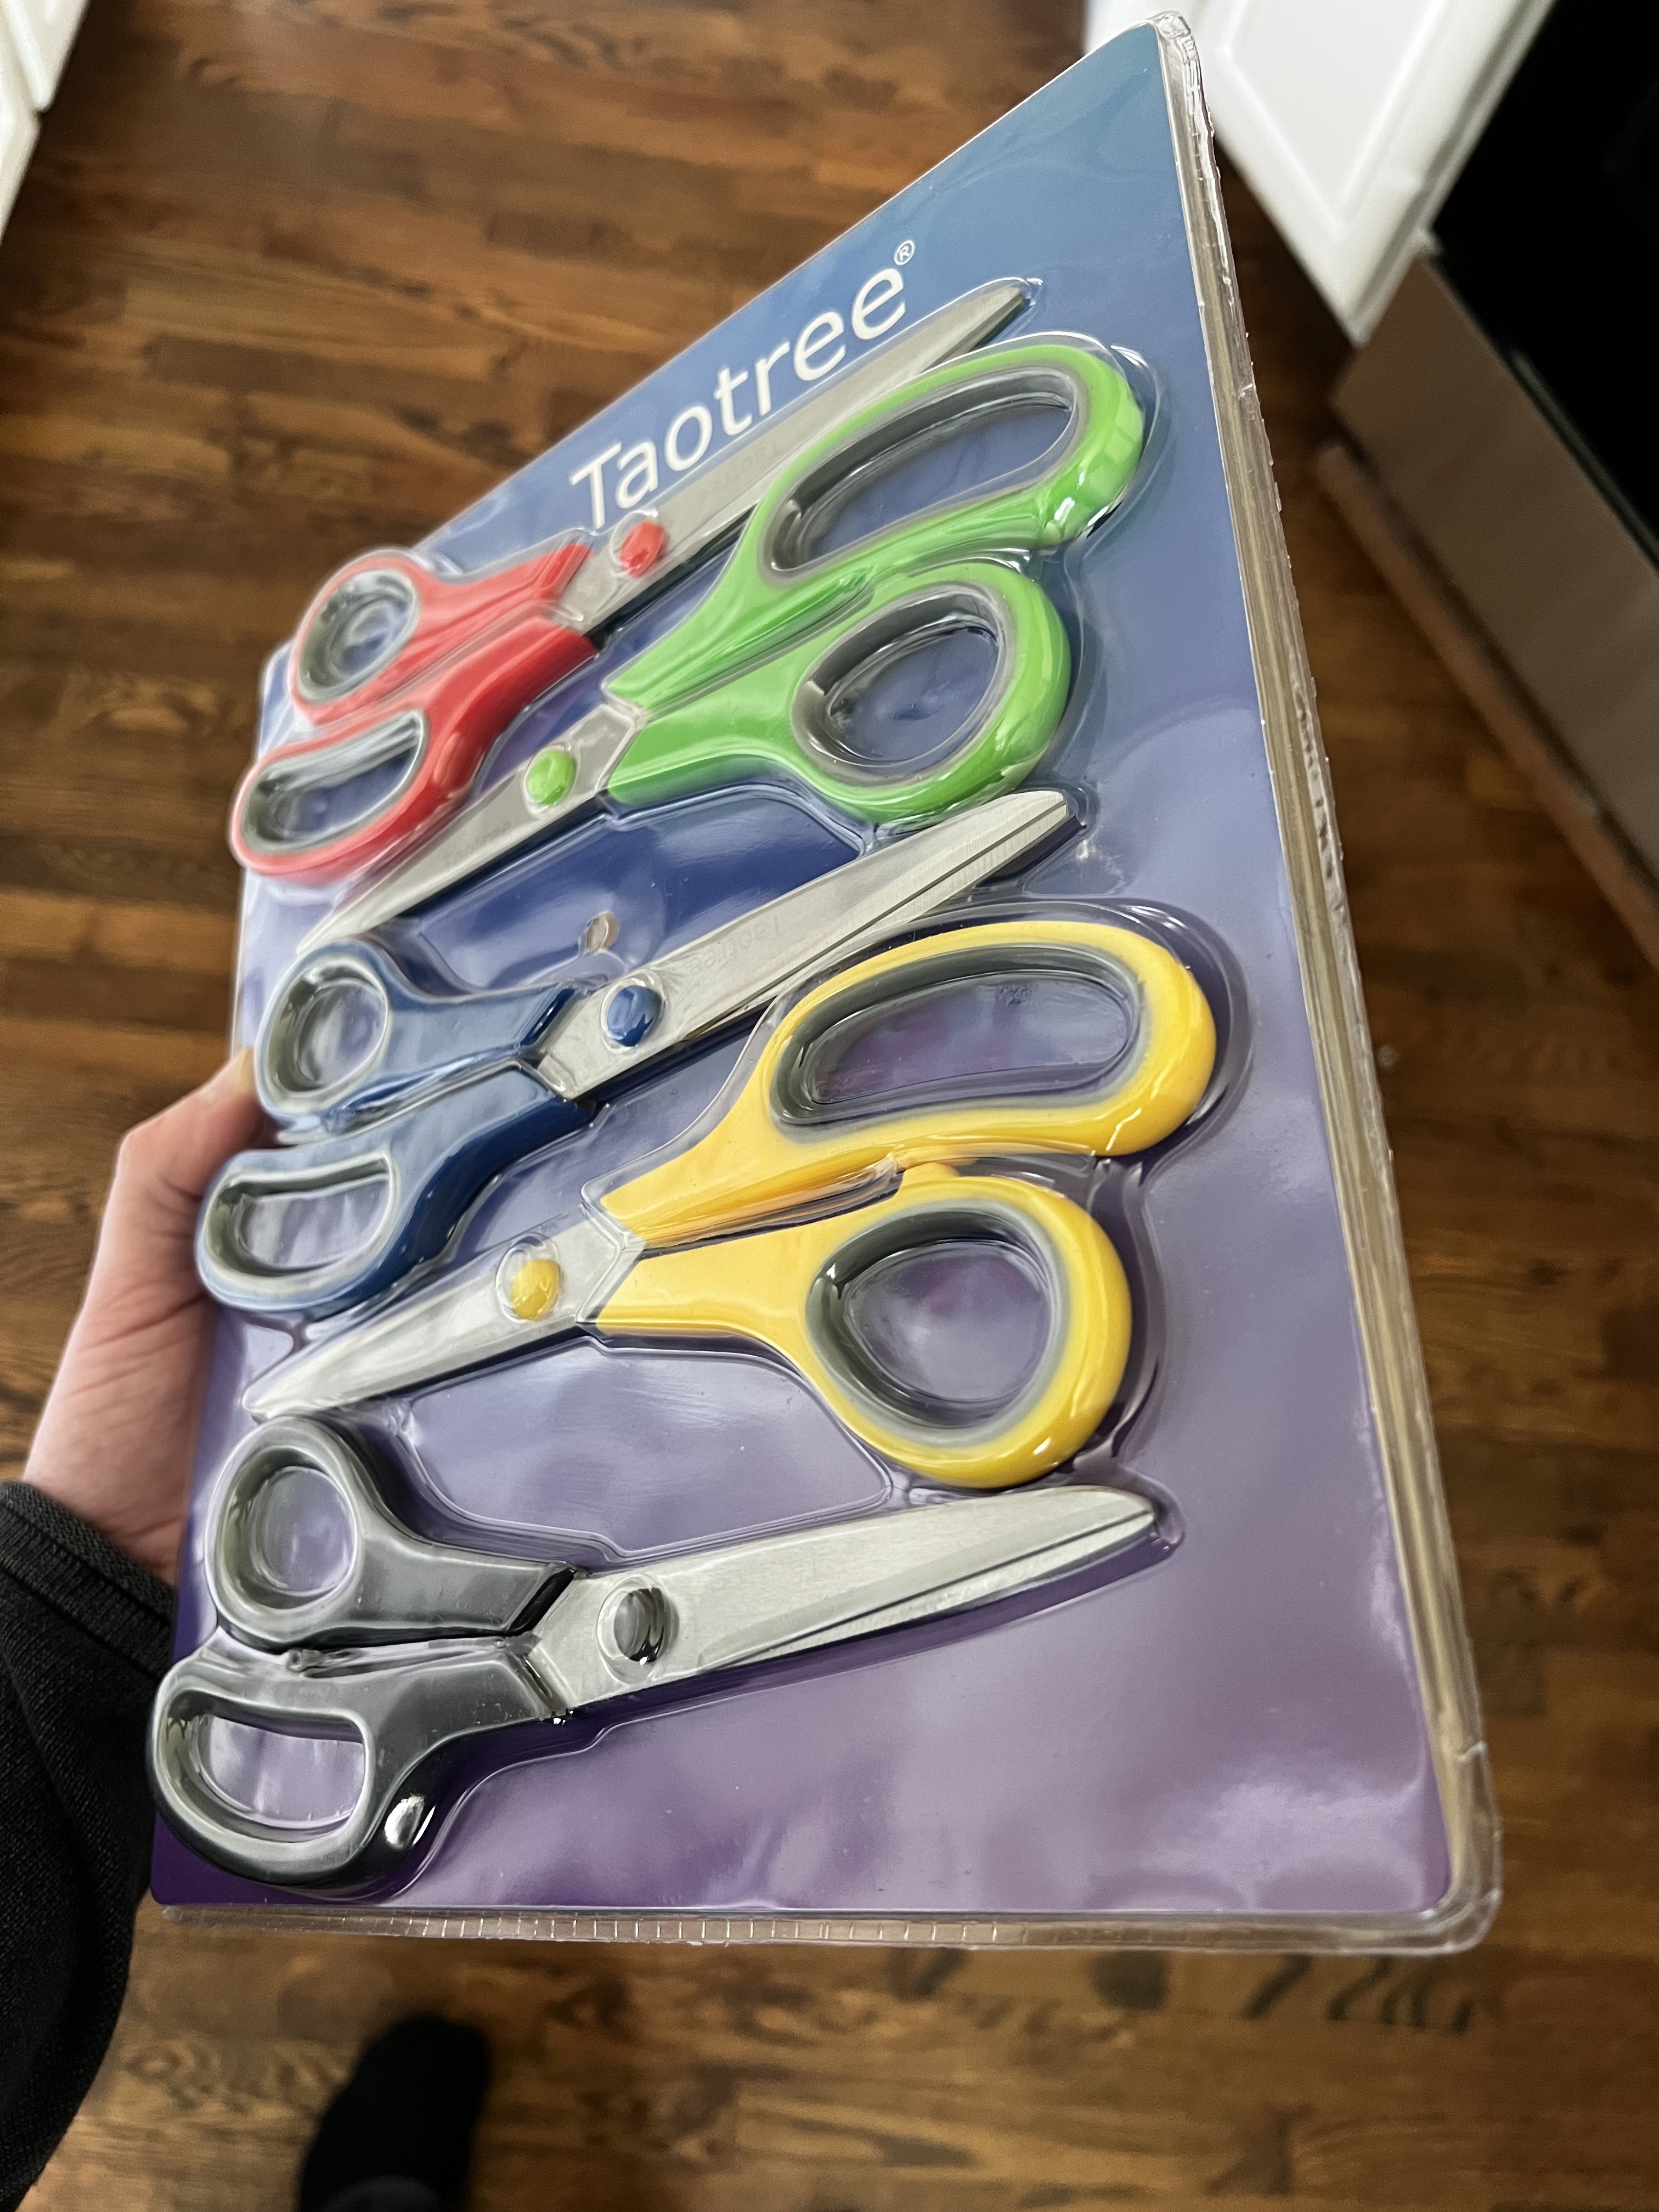 rob-sheridan.com on BSky on X: I ordered a pack of scissors and it came in  that hard sealed plastic packaging that you need scissors to open. Just in  awe of the violence